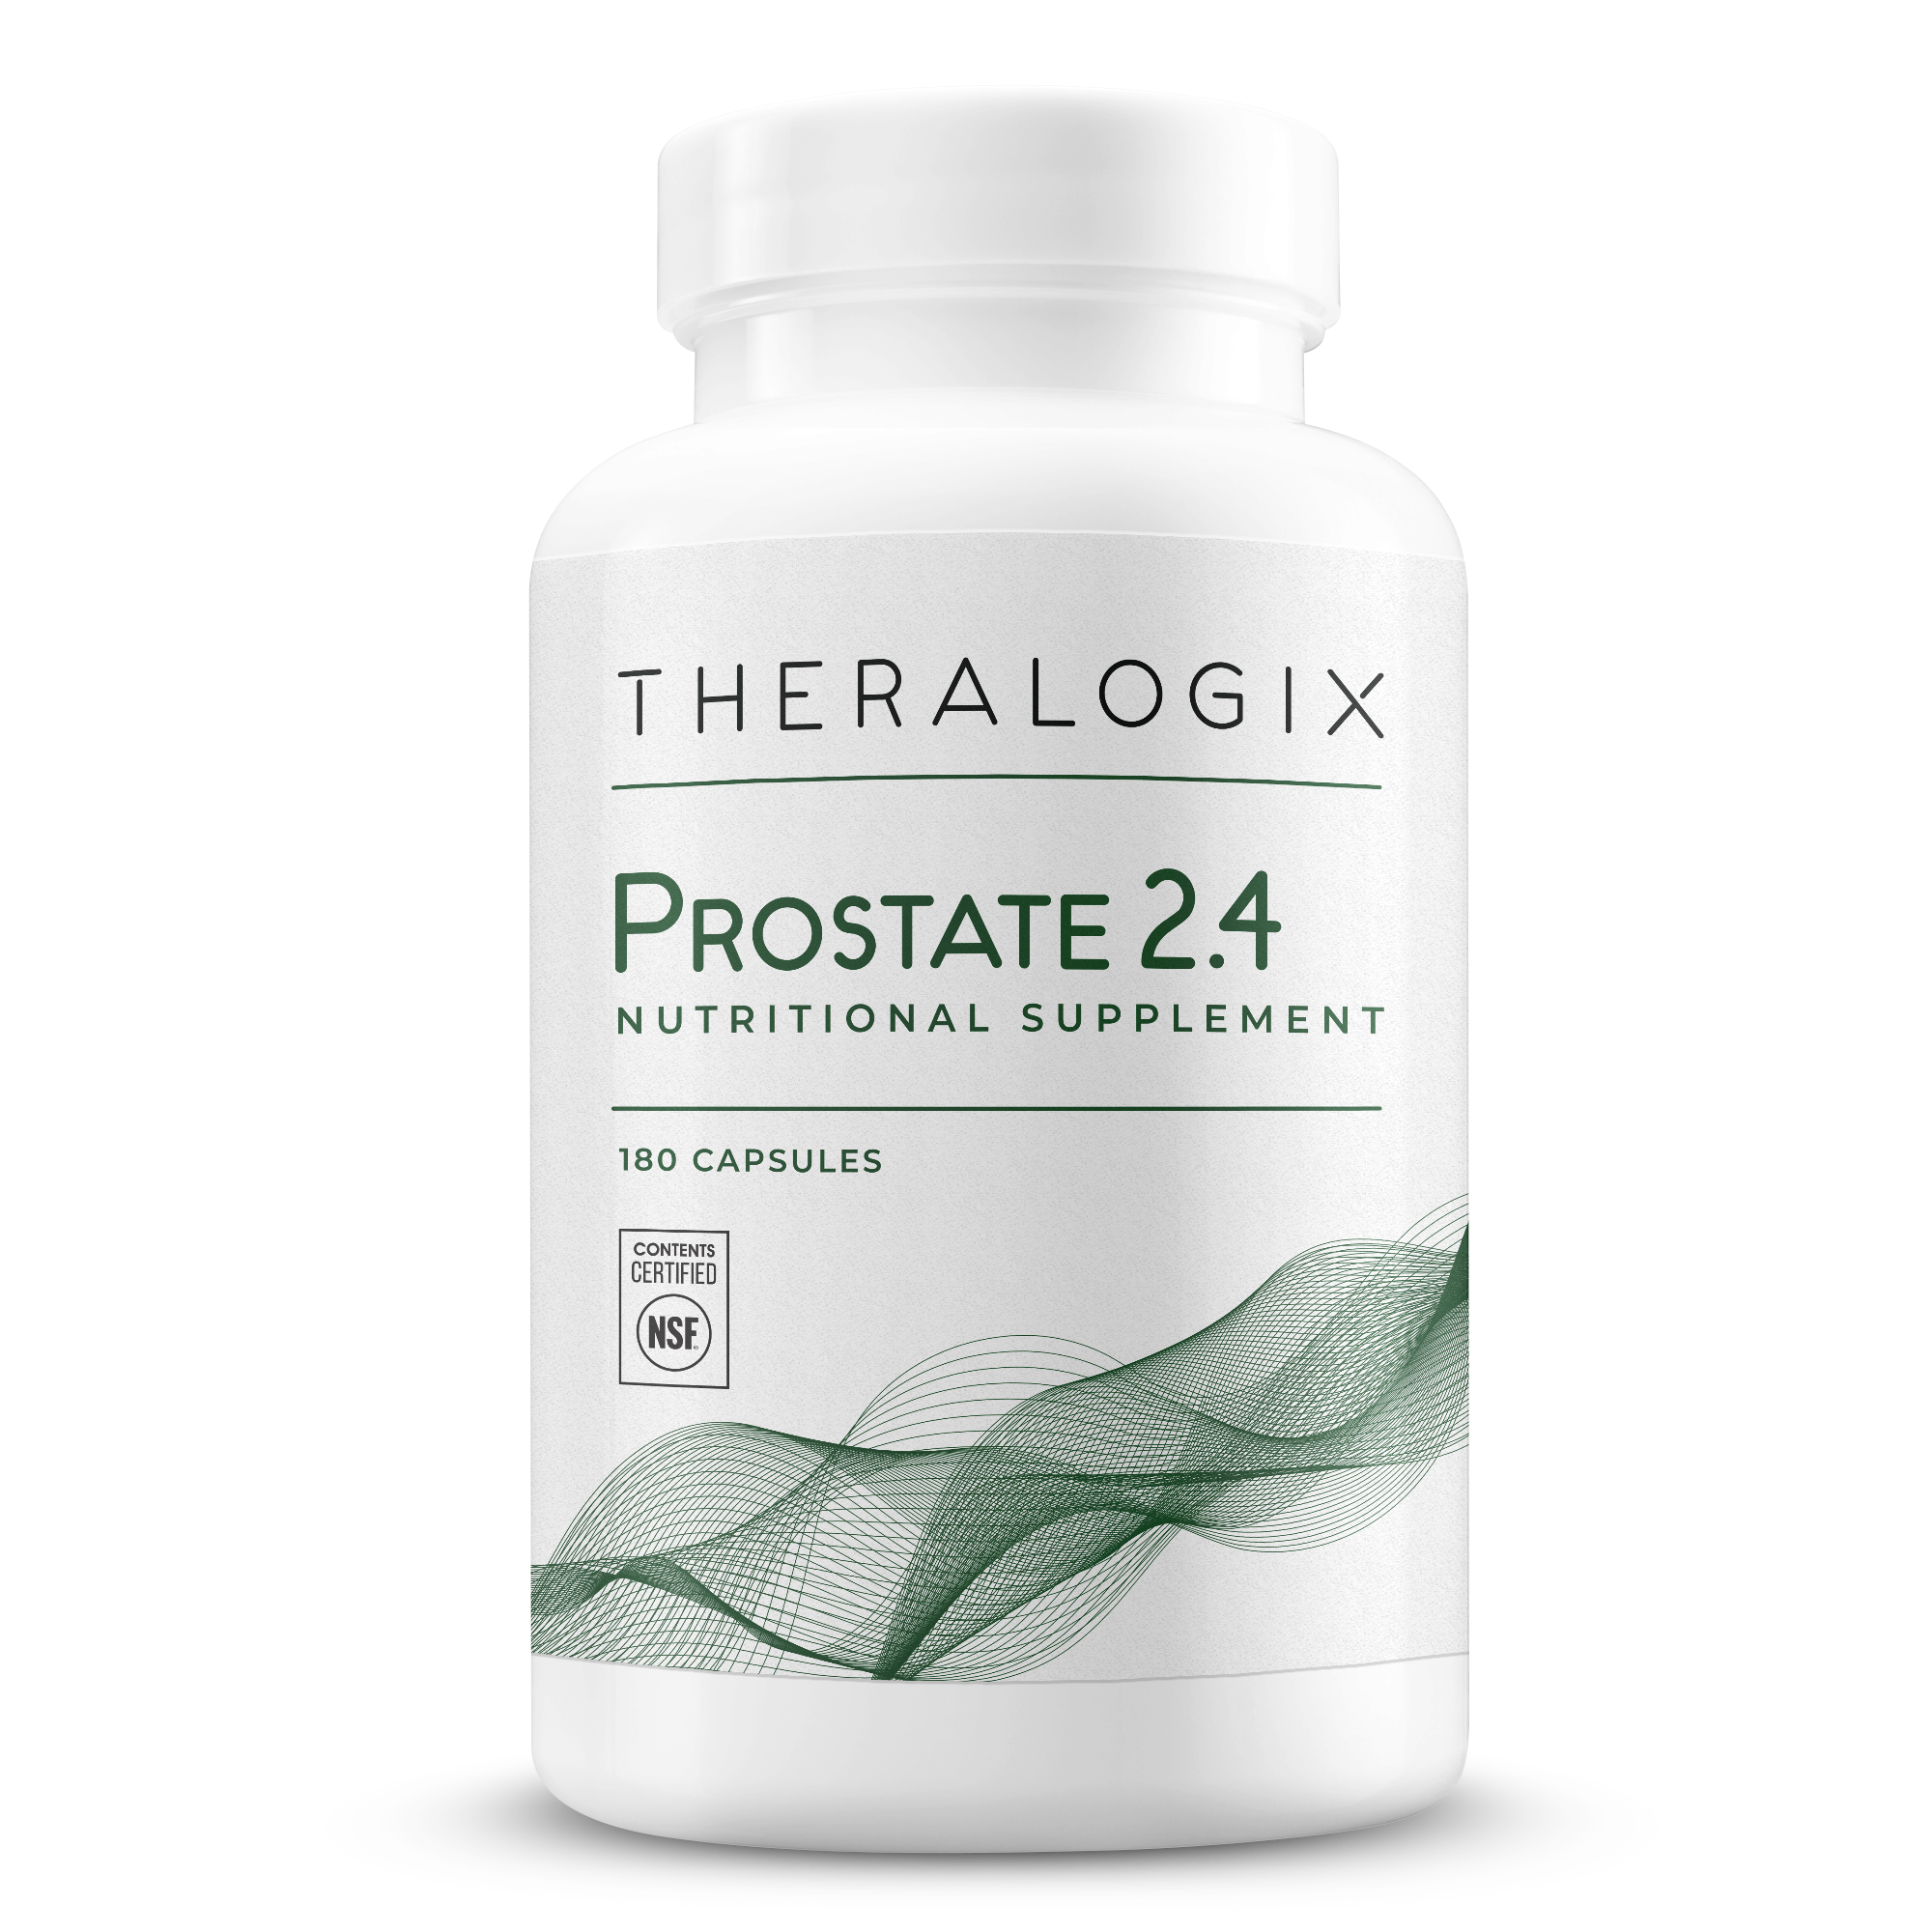 A prostate supplement formulated with six key vitamins, minerals, and phytonutrients,